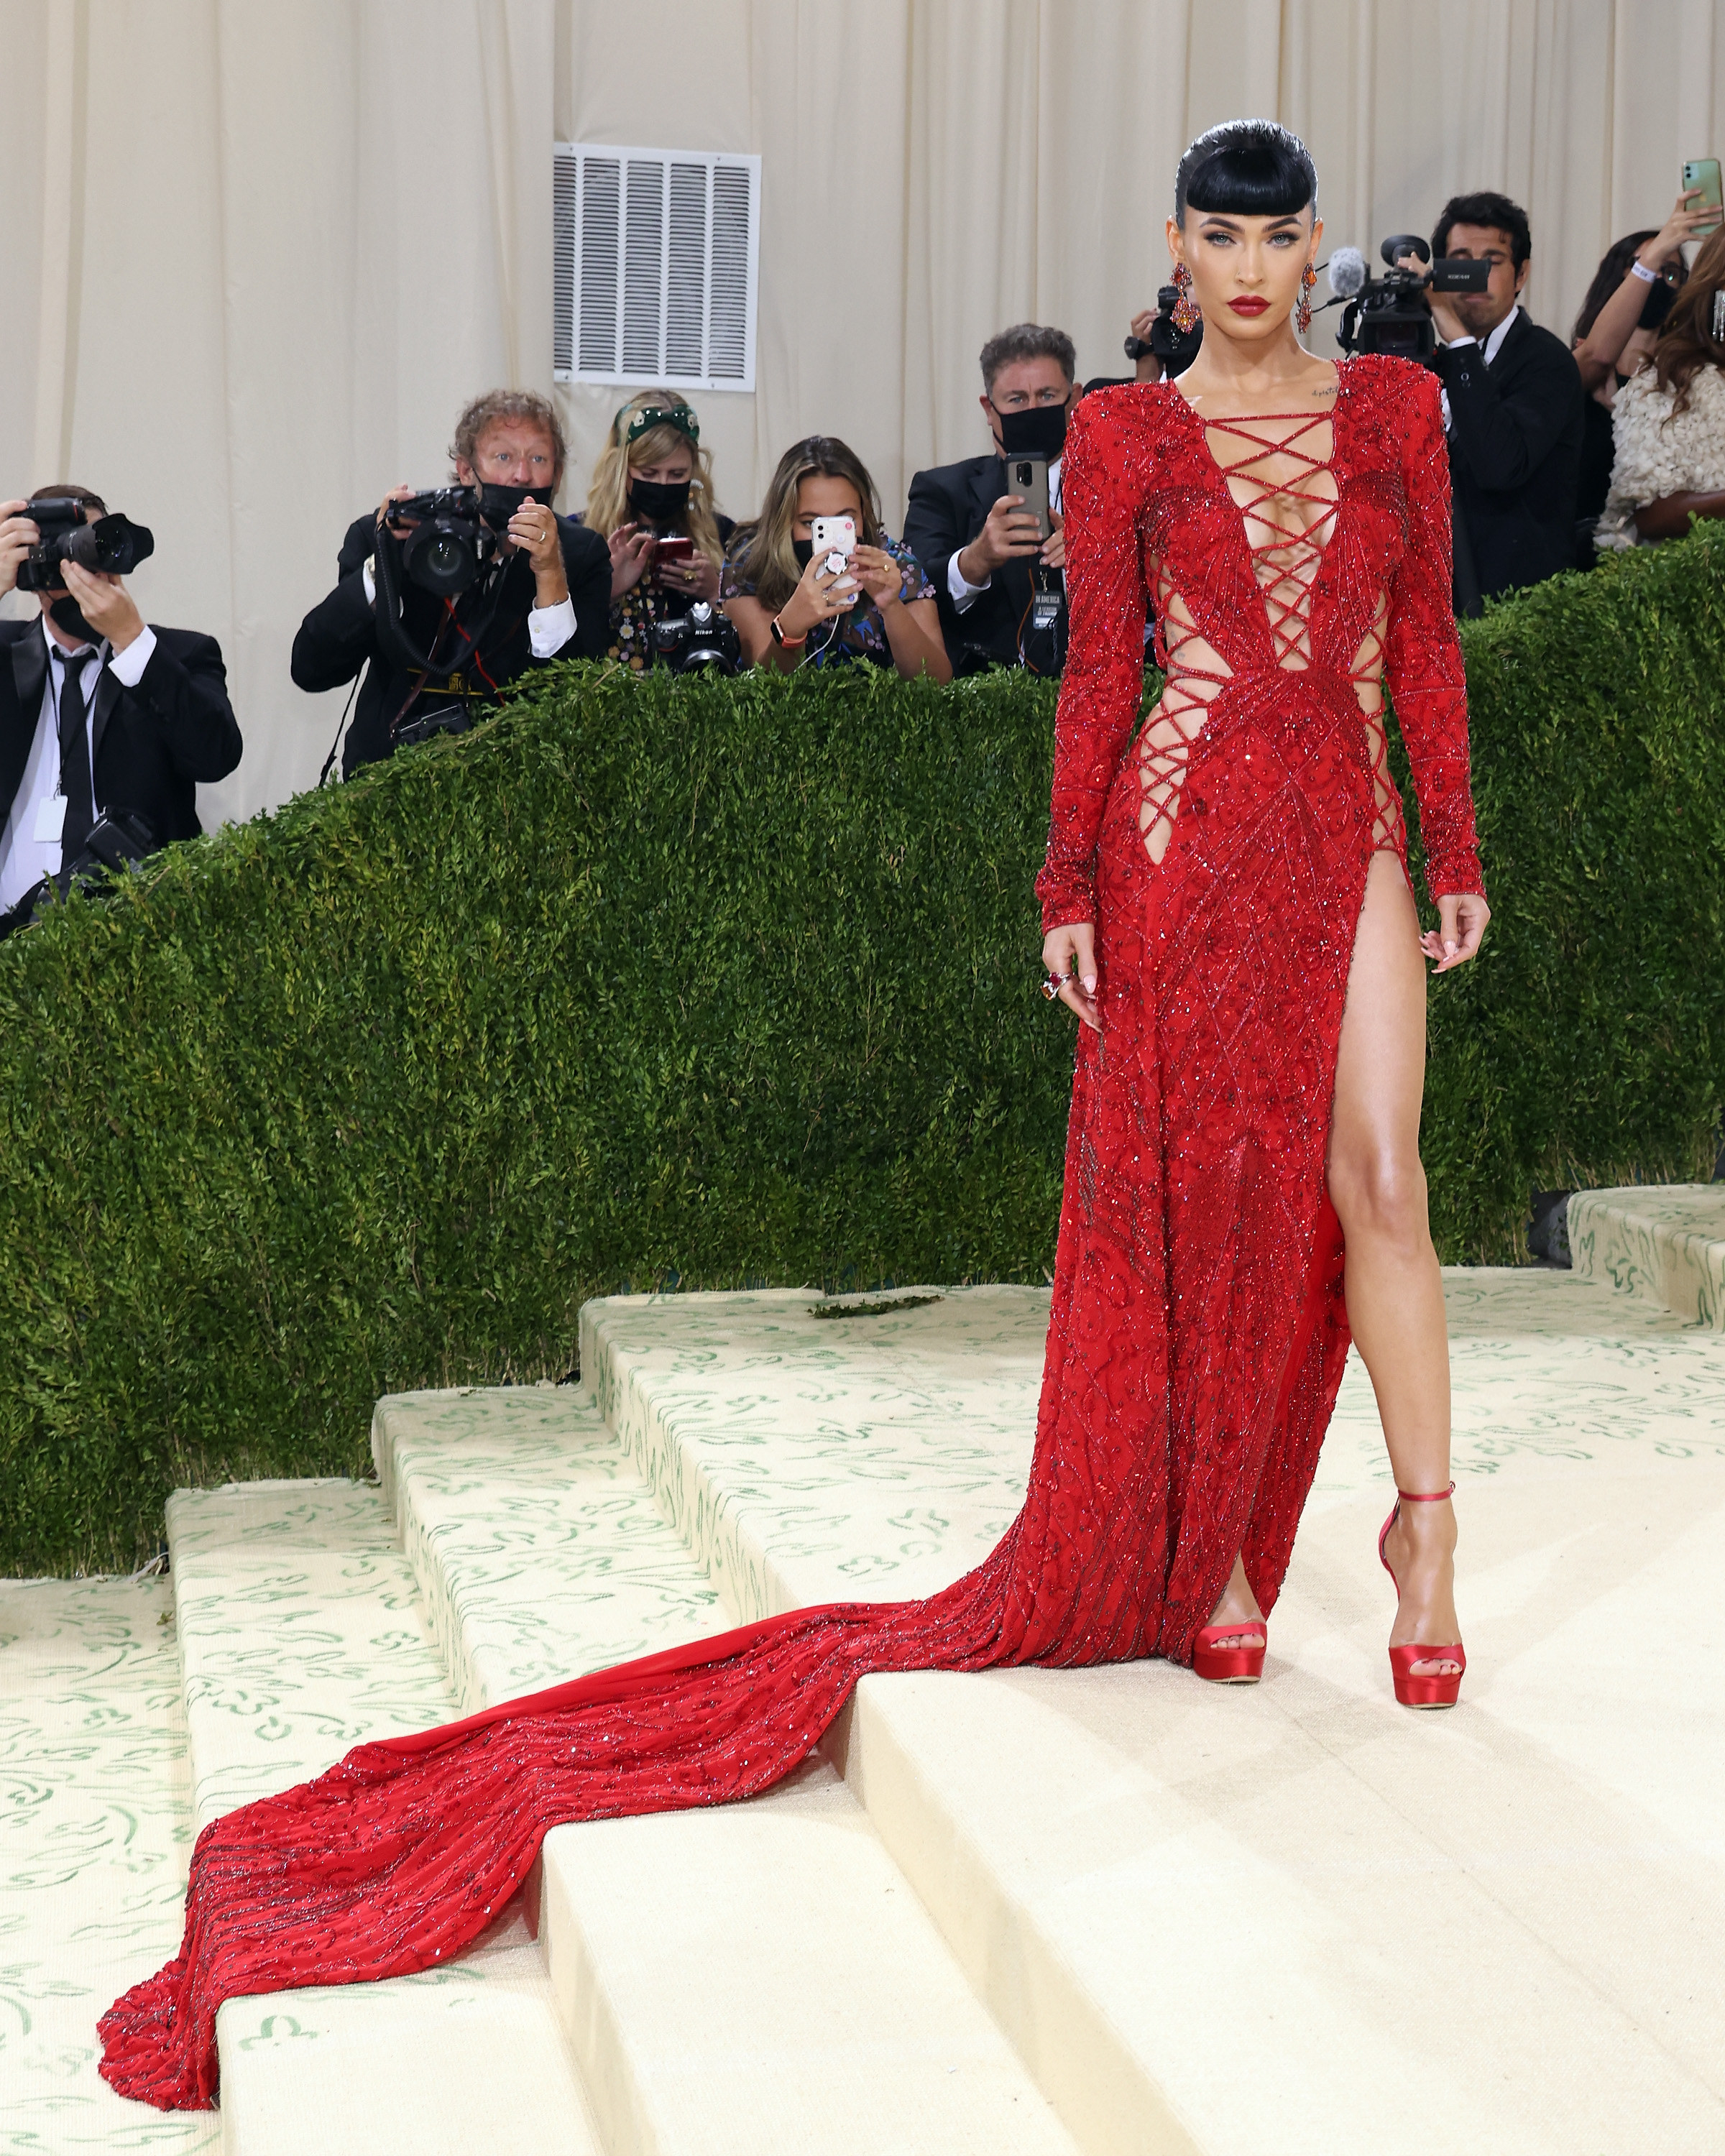 Megan wears a red gown with cutouts and criss-cross details across her body